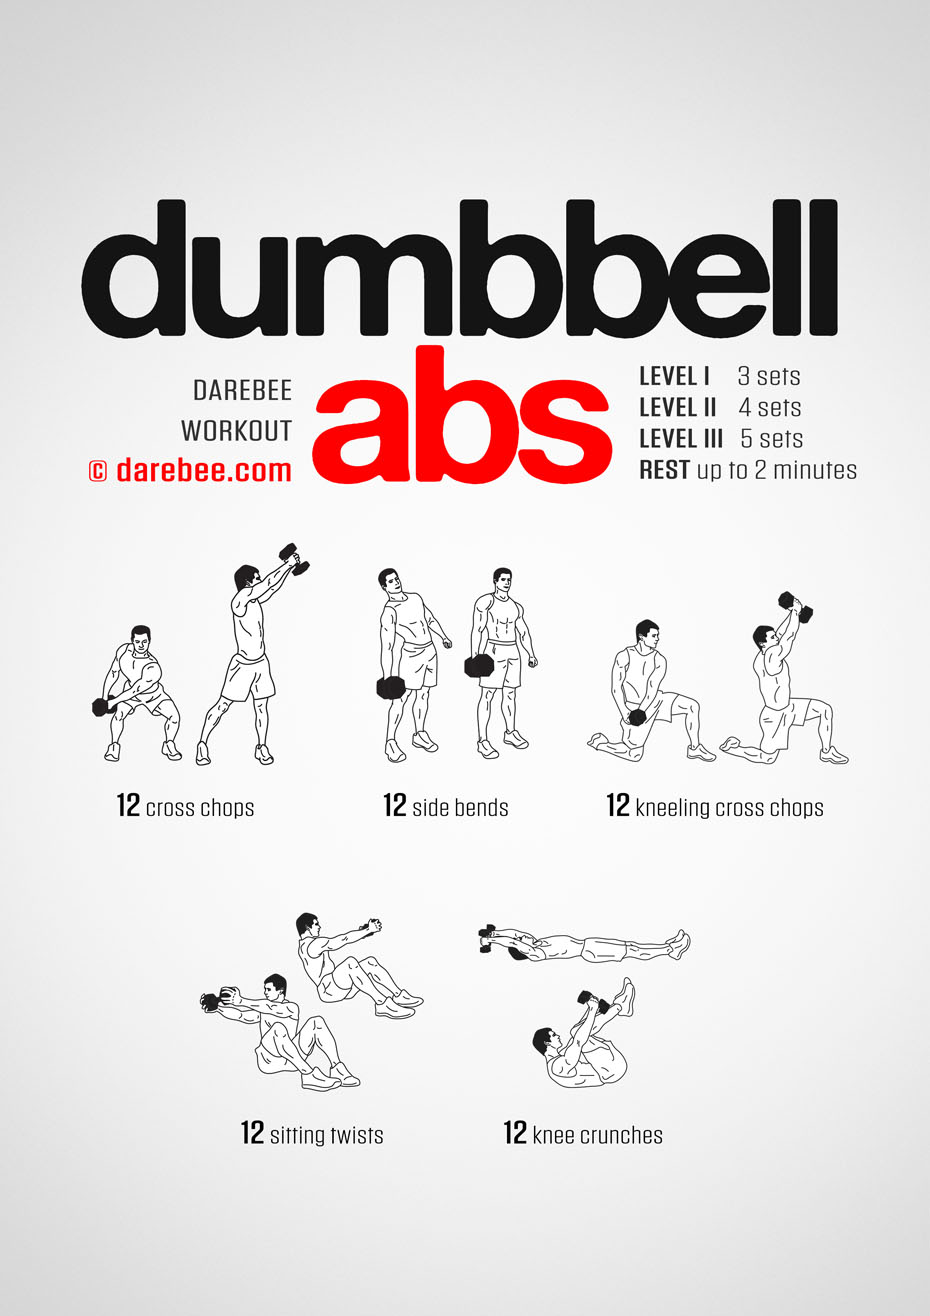 Dumbbell Abs is a Darebee home-fitness workout that proves you can't lift a weight with just your arms.